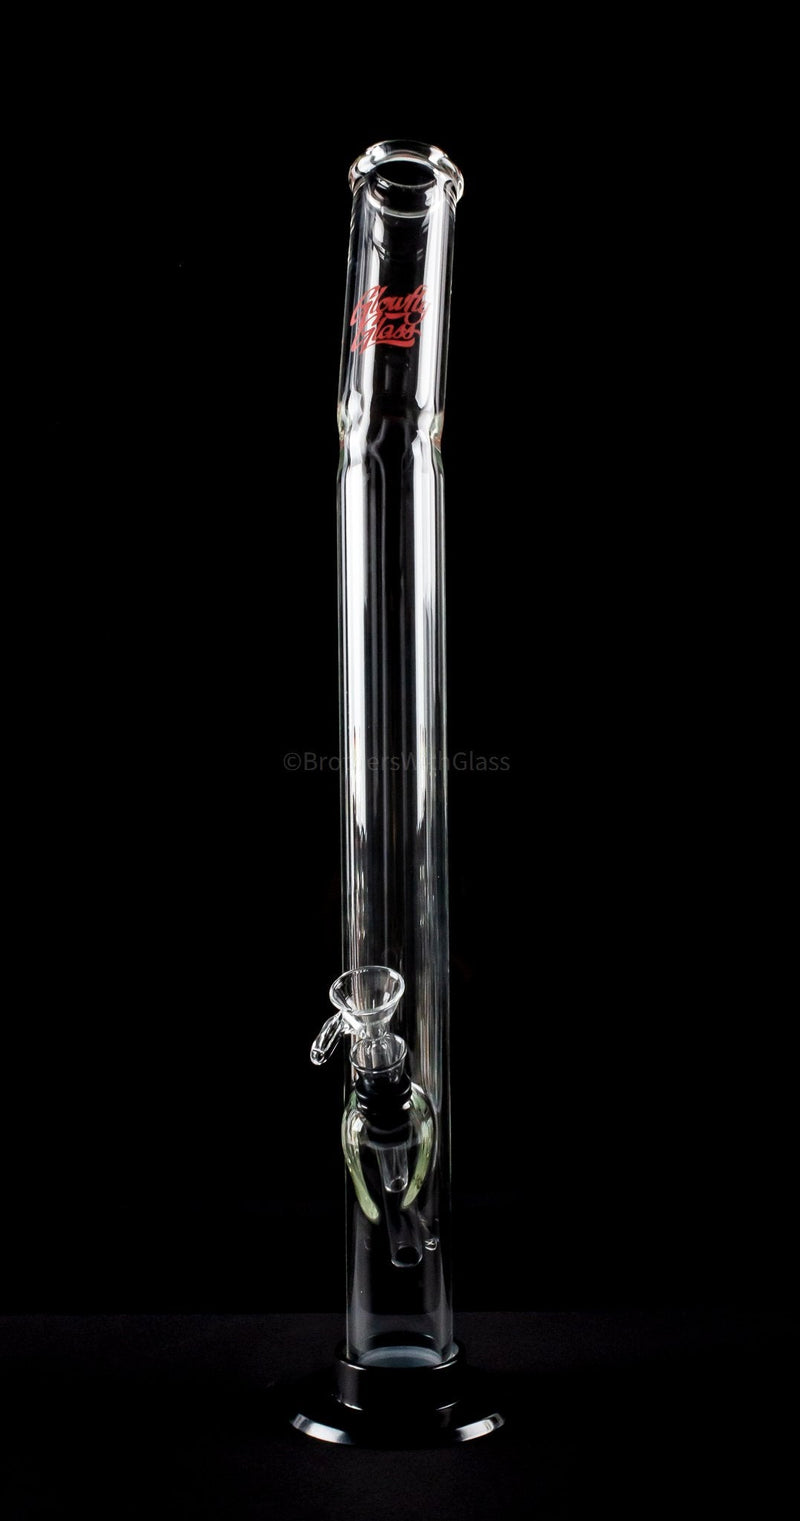 Glowfly Glass Bent Neck Bong With Removable Base.